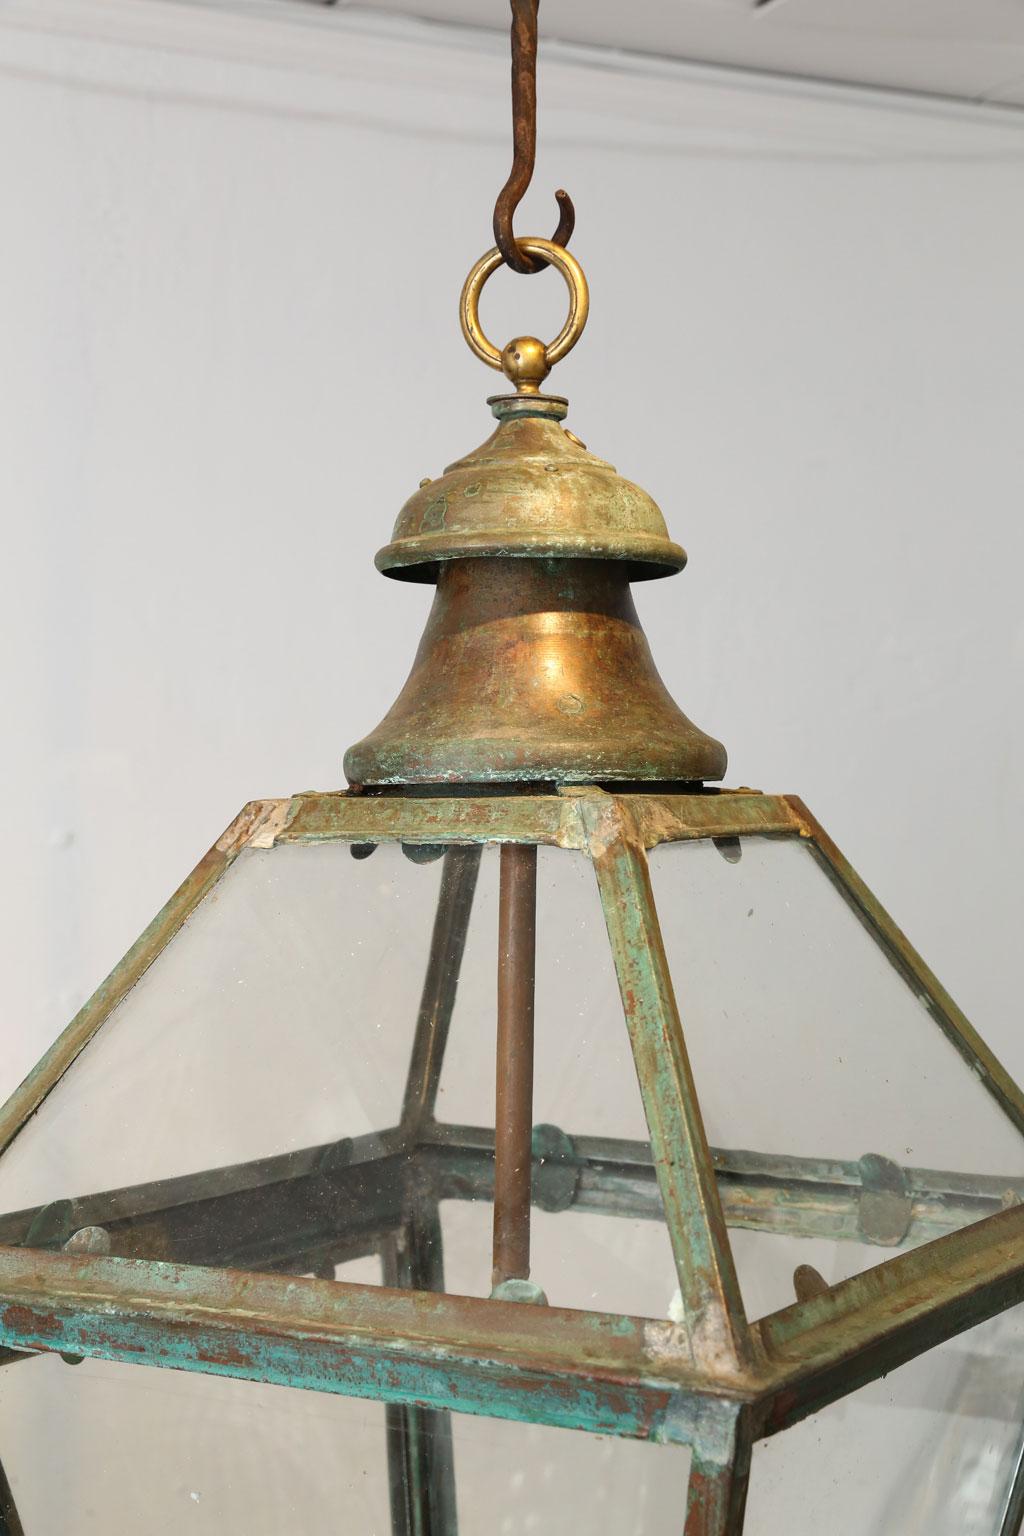 French Provincial Green-Verdigris Copper and Brass Lantern